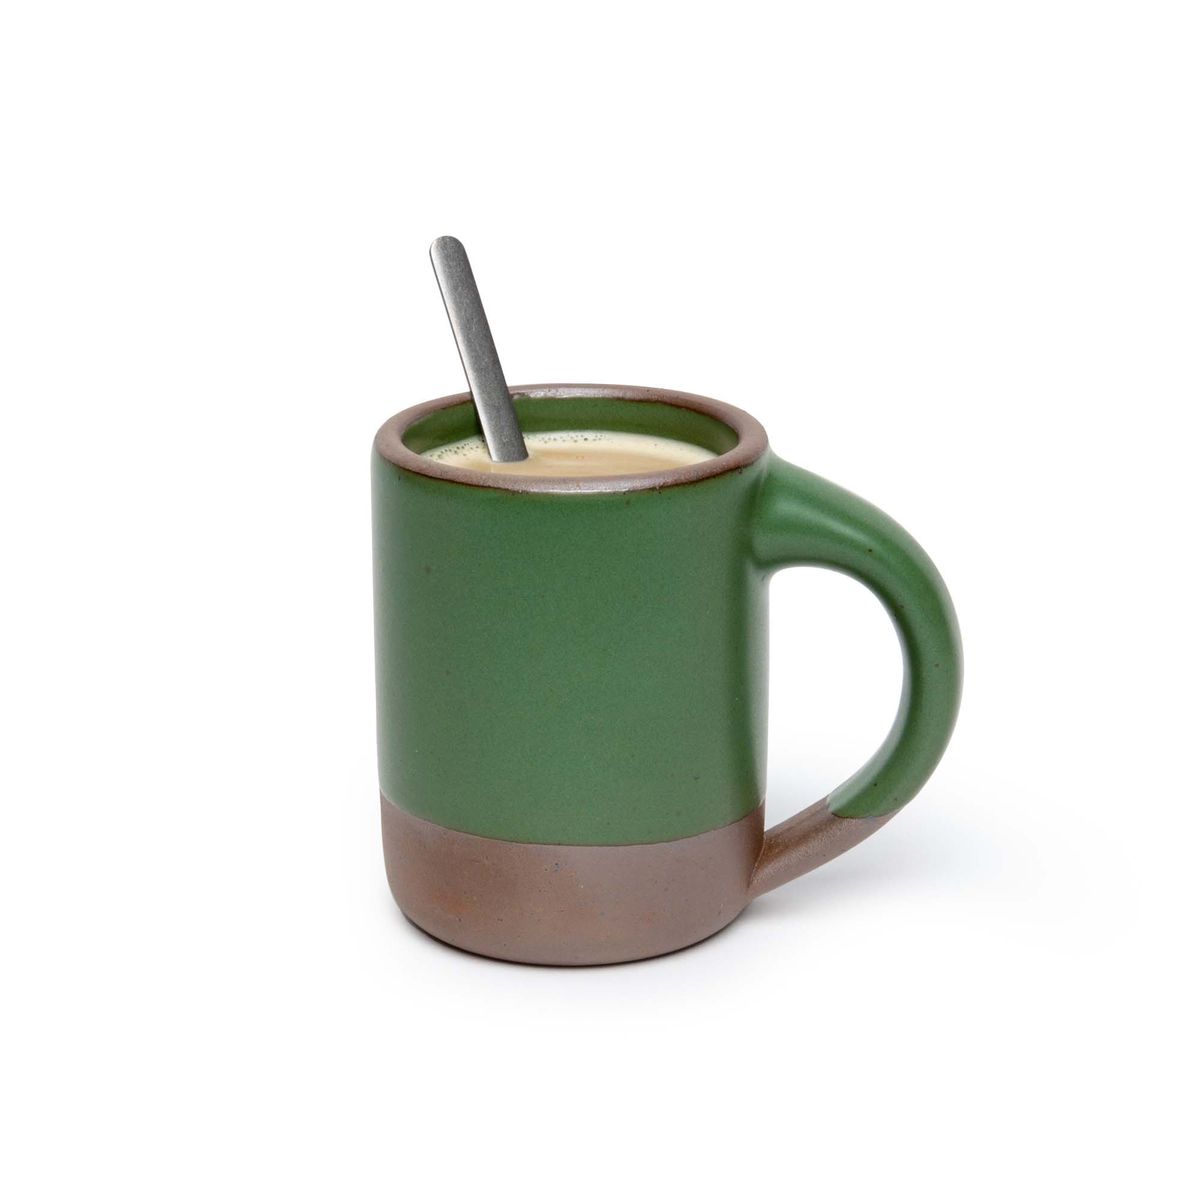 A medium sized ceramic mug with handle in a deep, verdant green color featuring iron speckles and unglazed rim and bottom base, filled with coffee and spoon